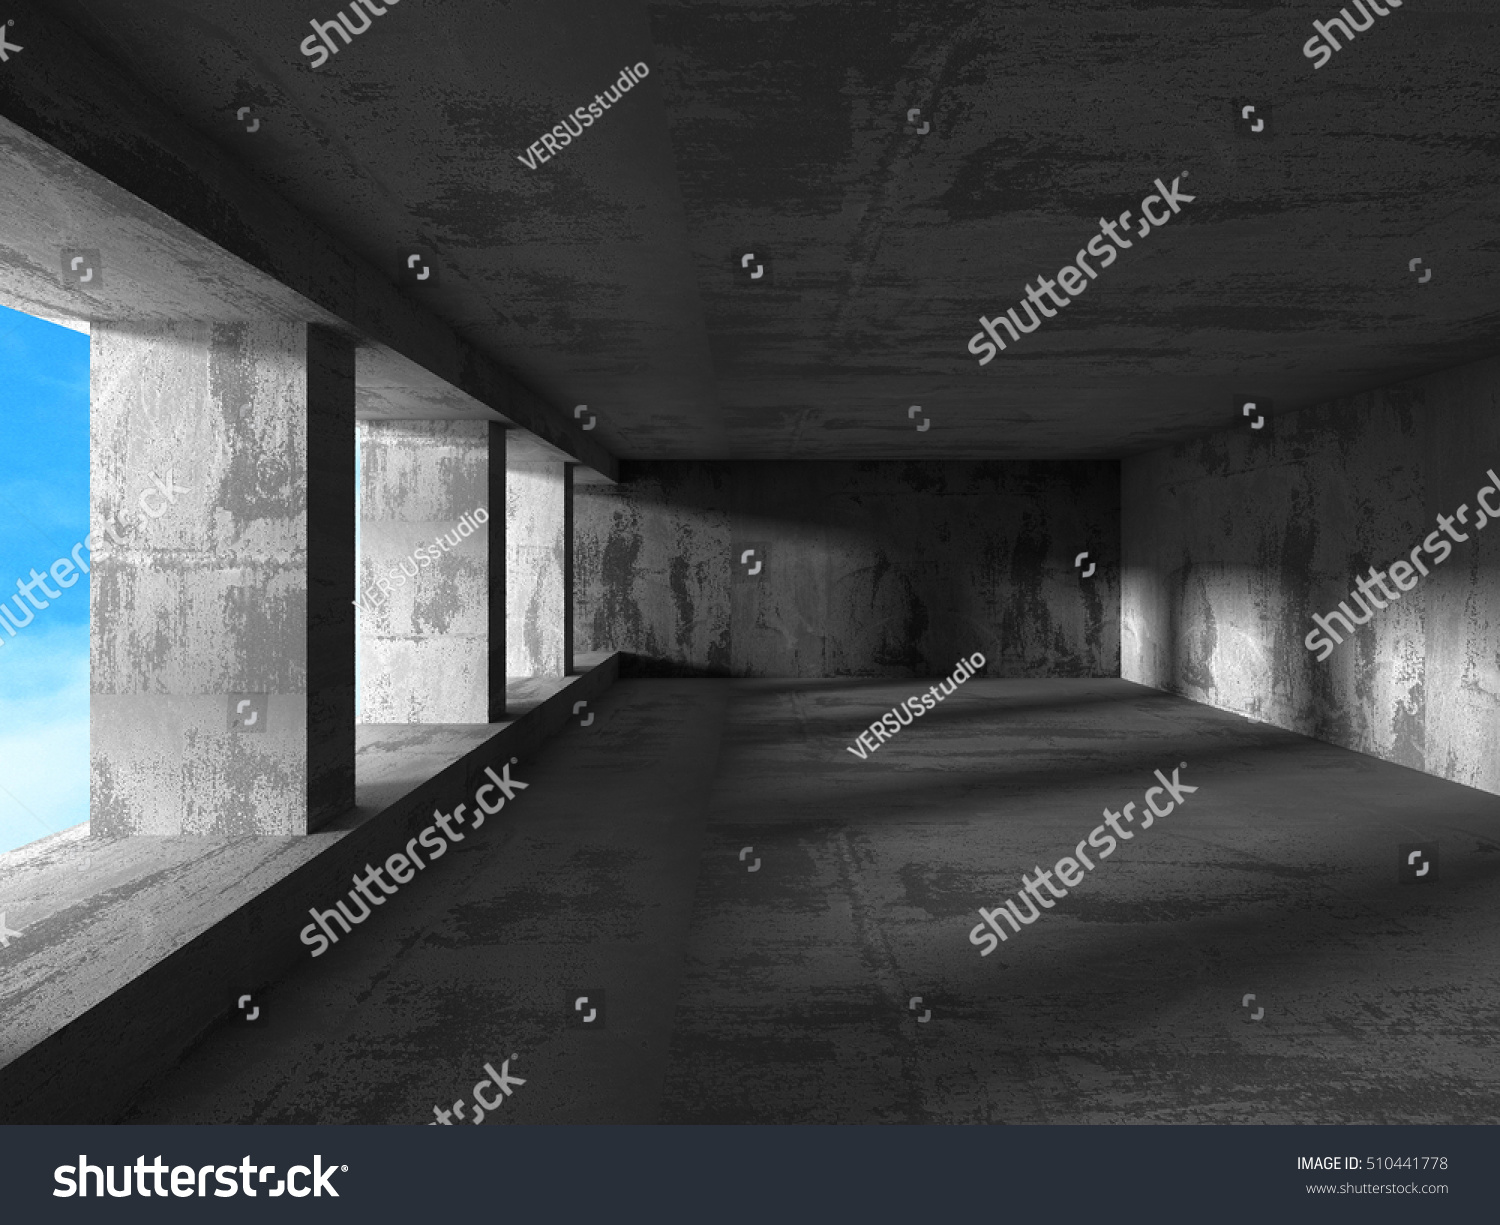 Geometric architecture background. Concrete walls room with cloudy sky. 3d render illustration #510441778